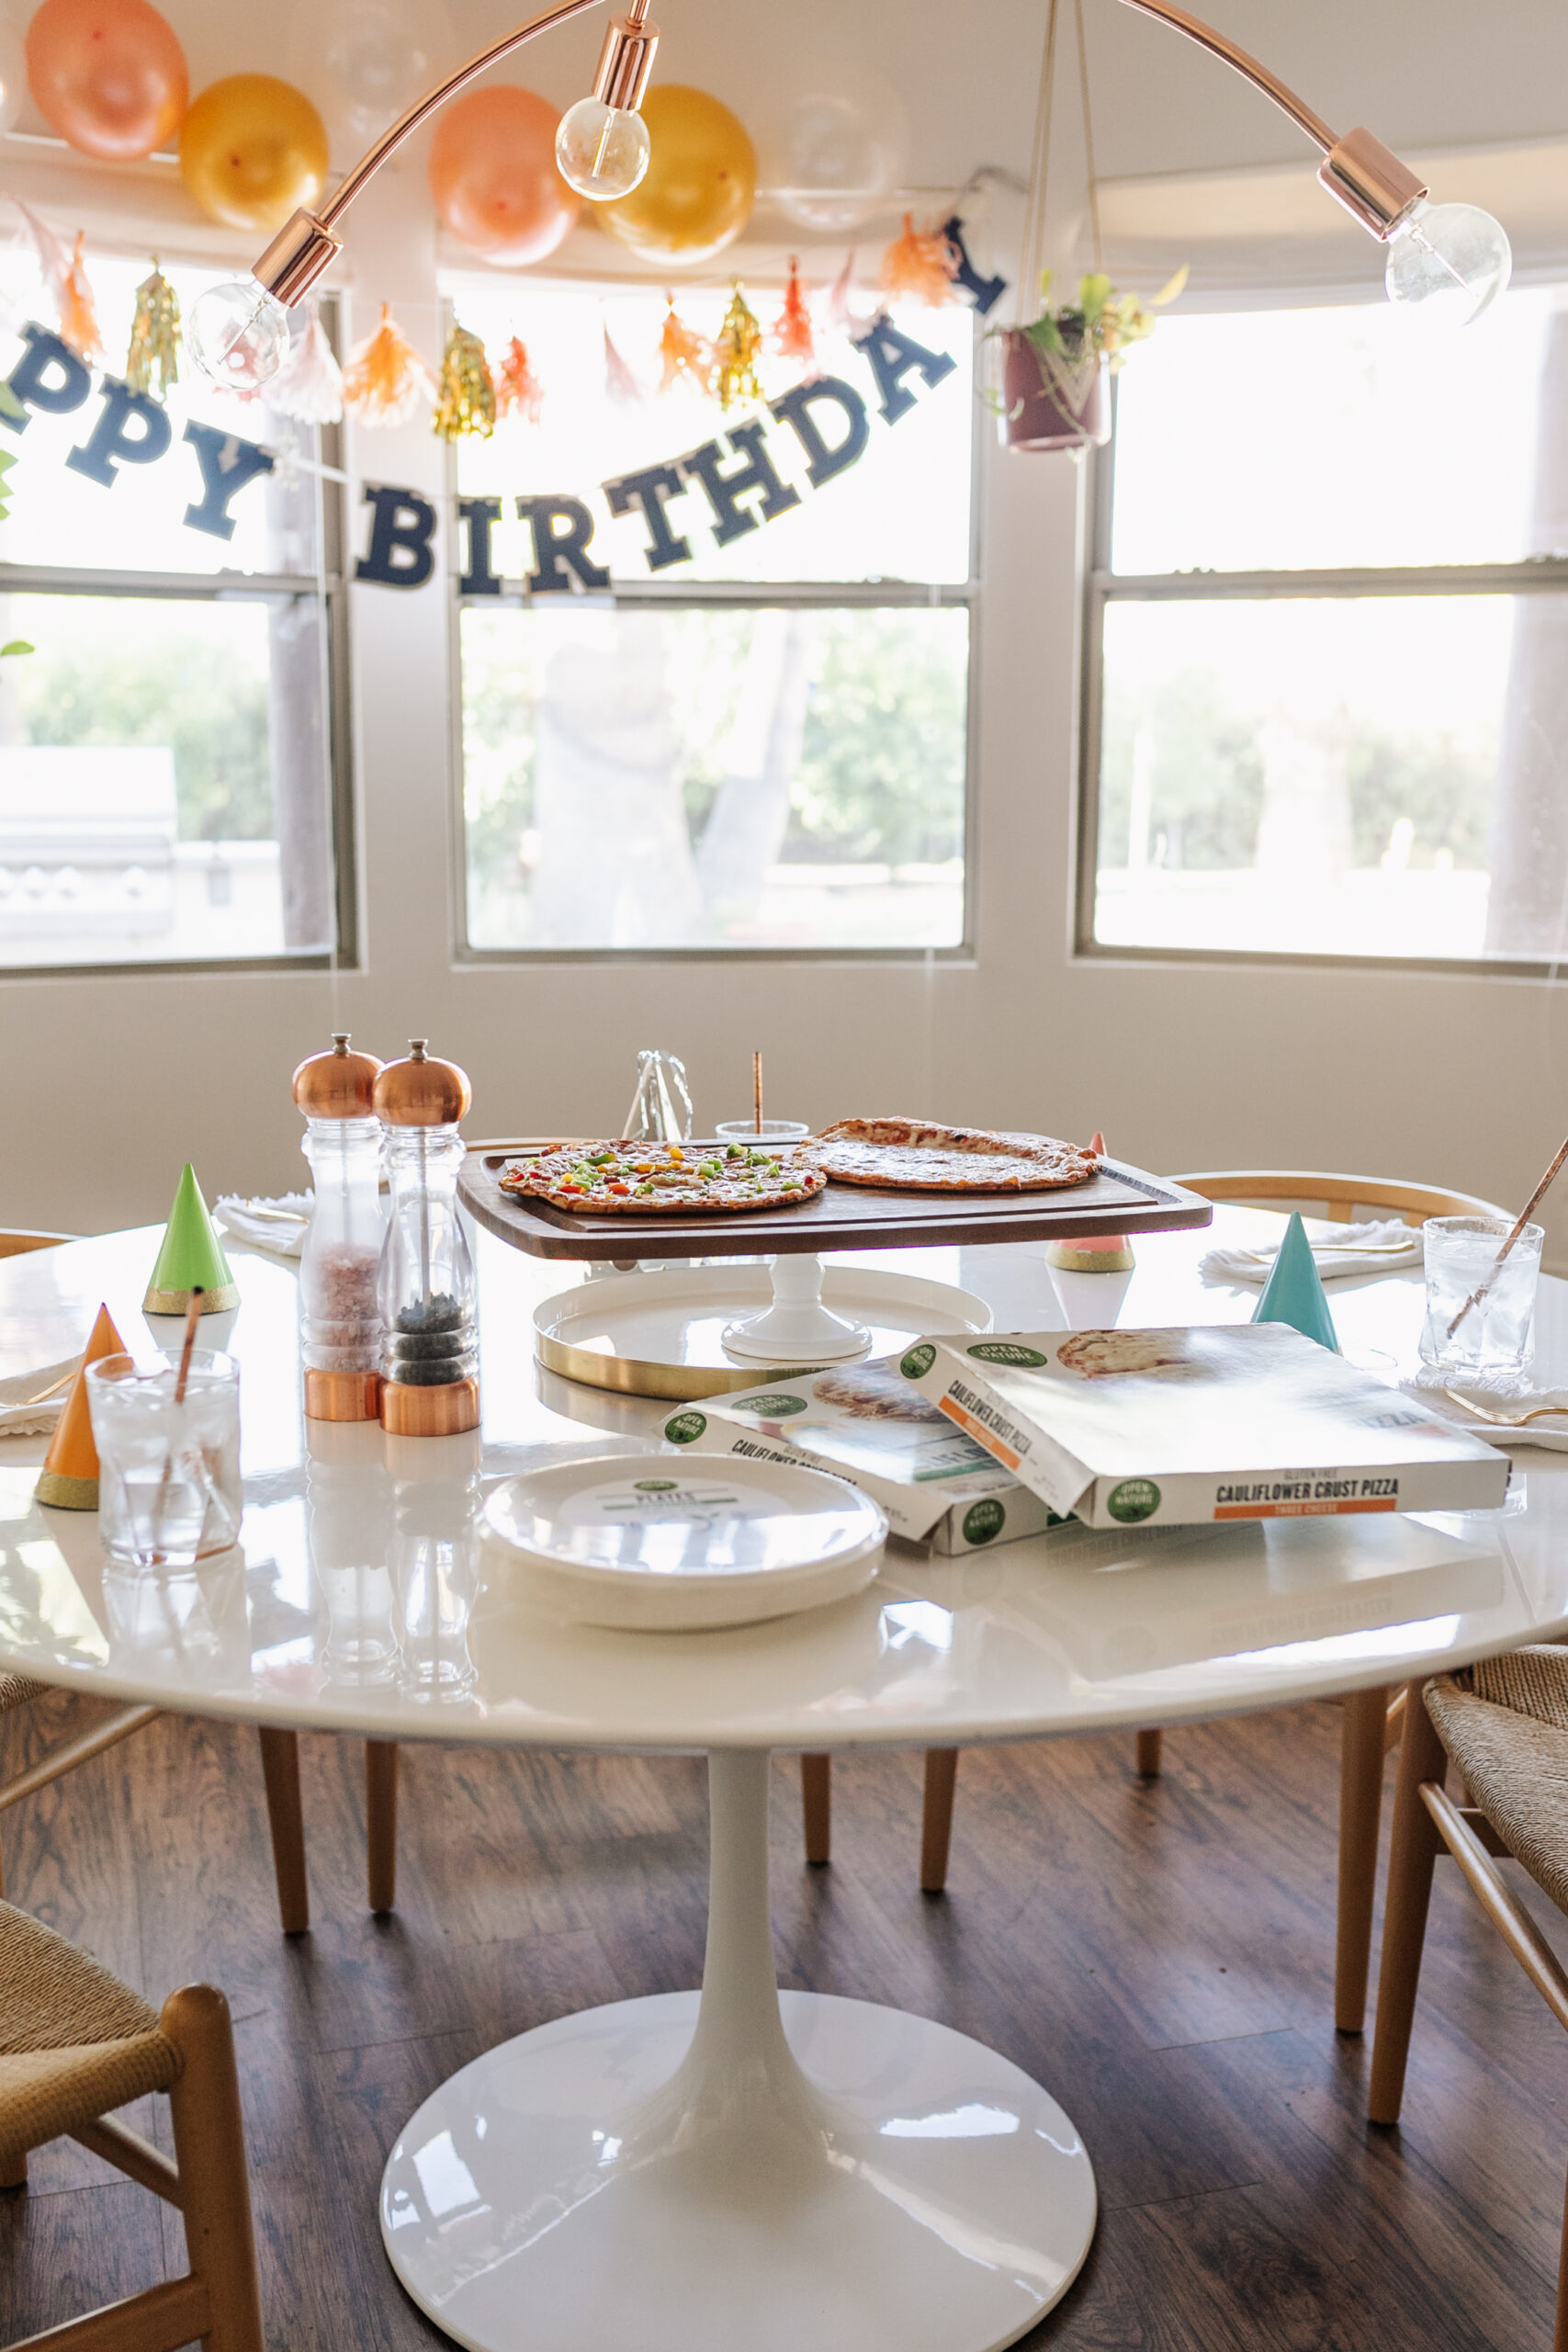 setting the table for pizza and cake for our our simple family birthday party at home. #thelovedesignedlife #pizzaandcake #opennature #oorganics #sfeway